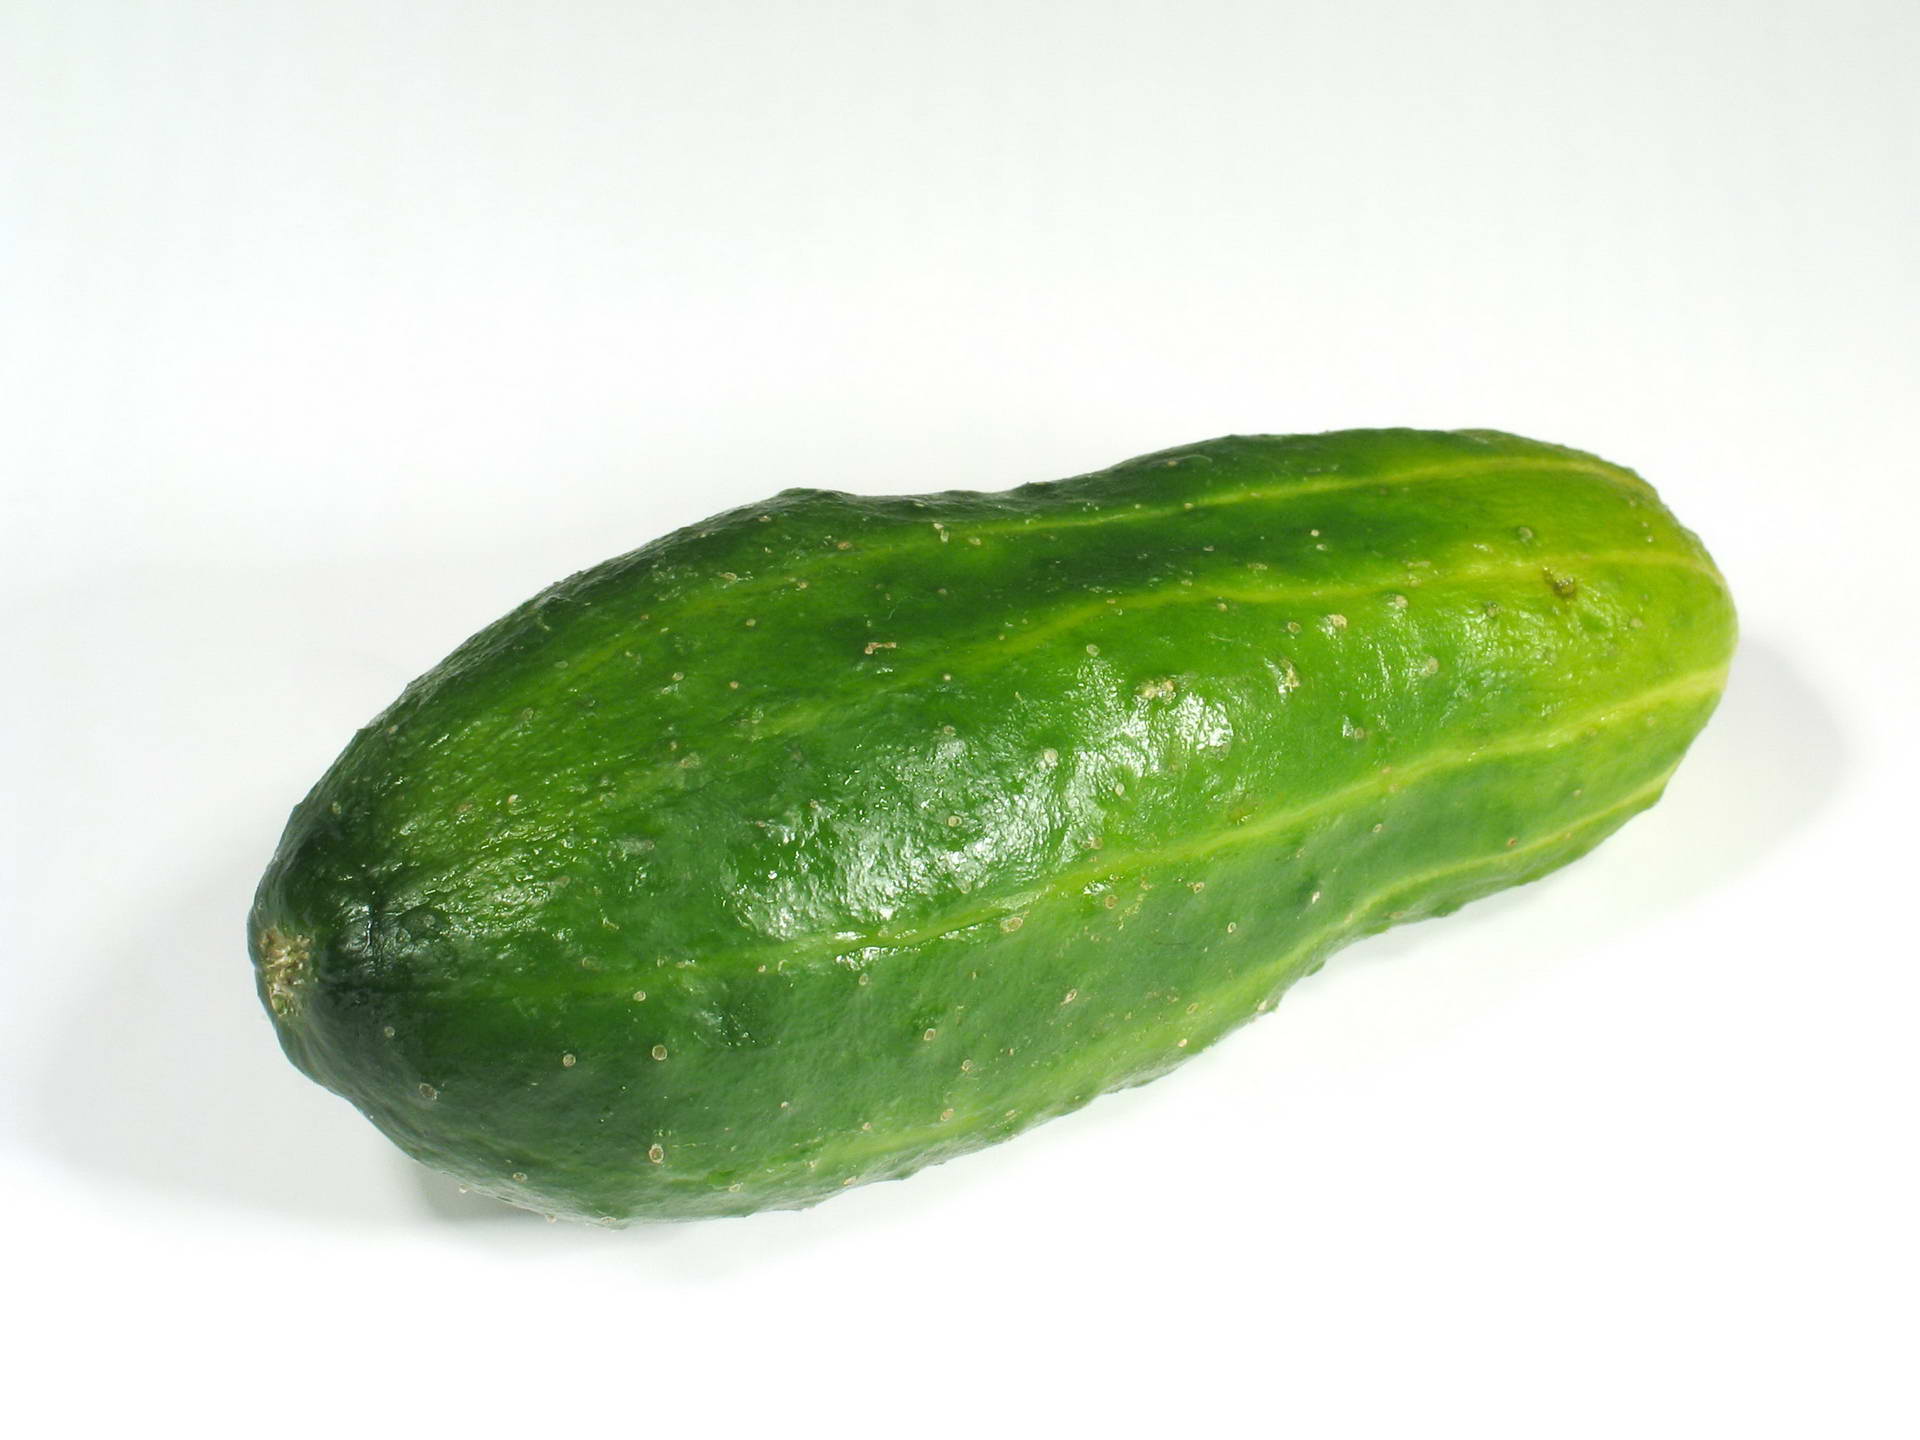 Cucumber Full HD Wallpaper and Background Imagex1440